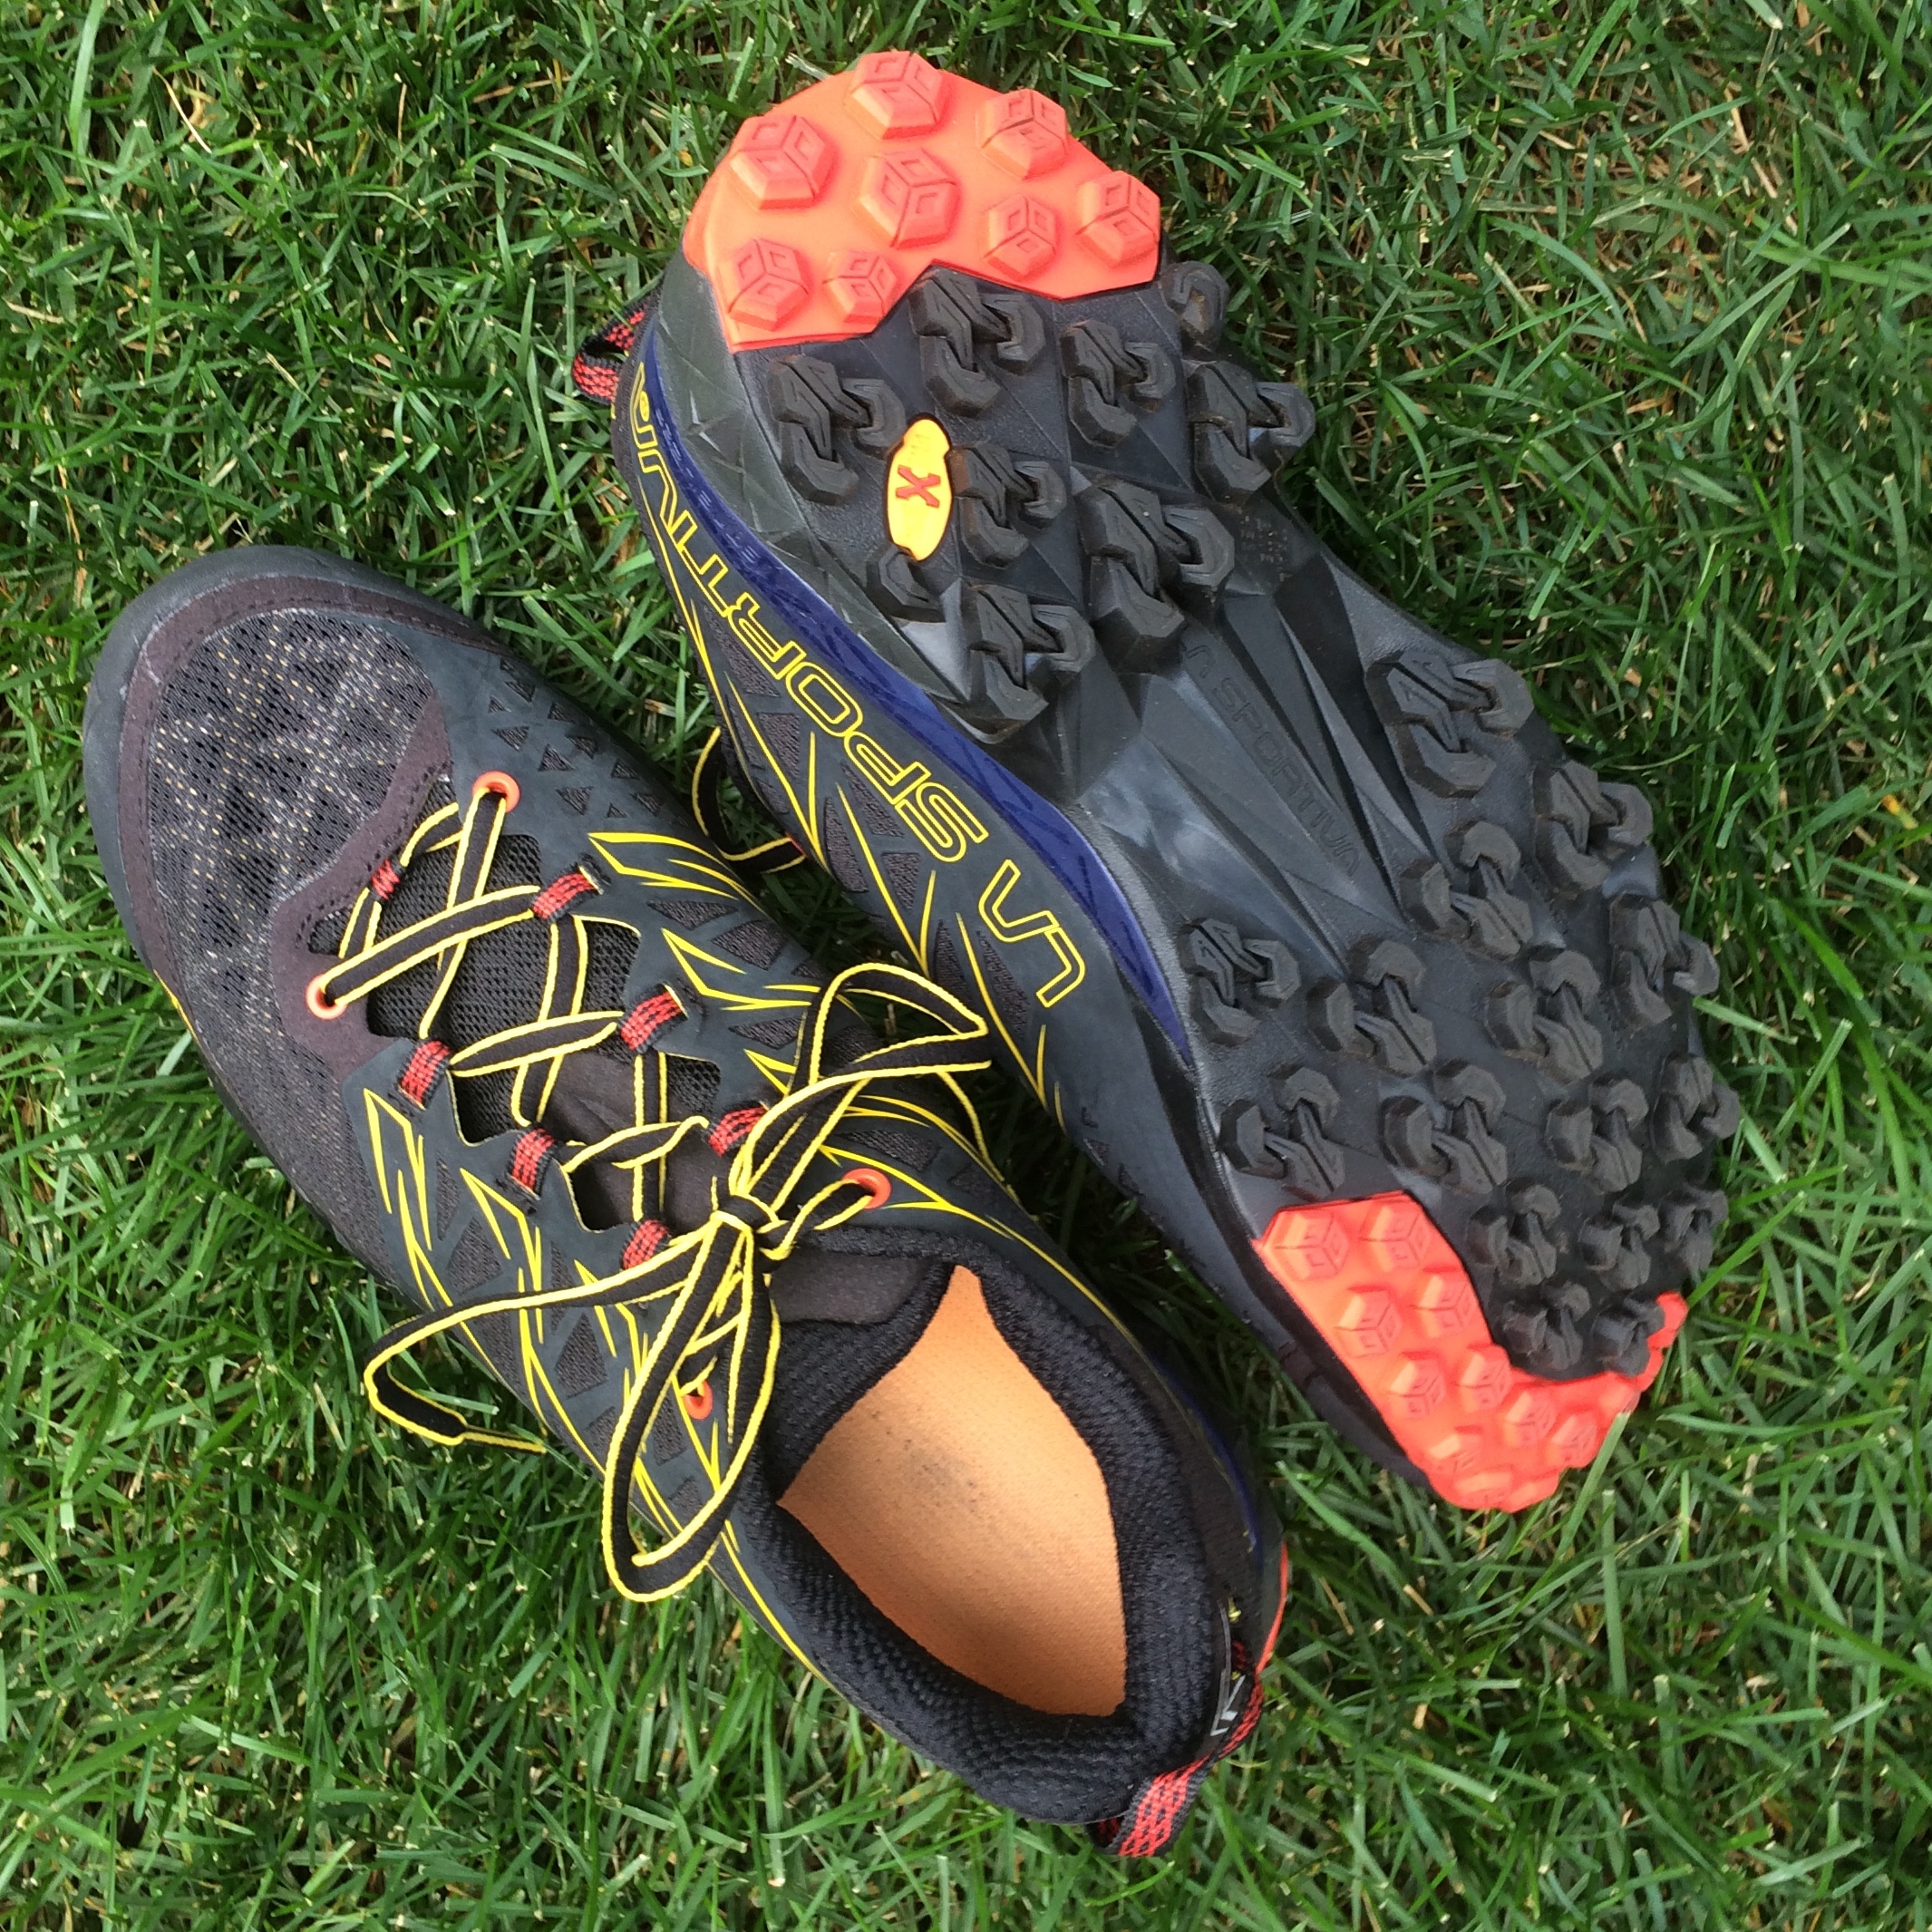 La Sportiva uses a patented rubber sole to make the Akyra responsive in uneven and wet terrain.